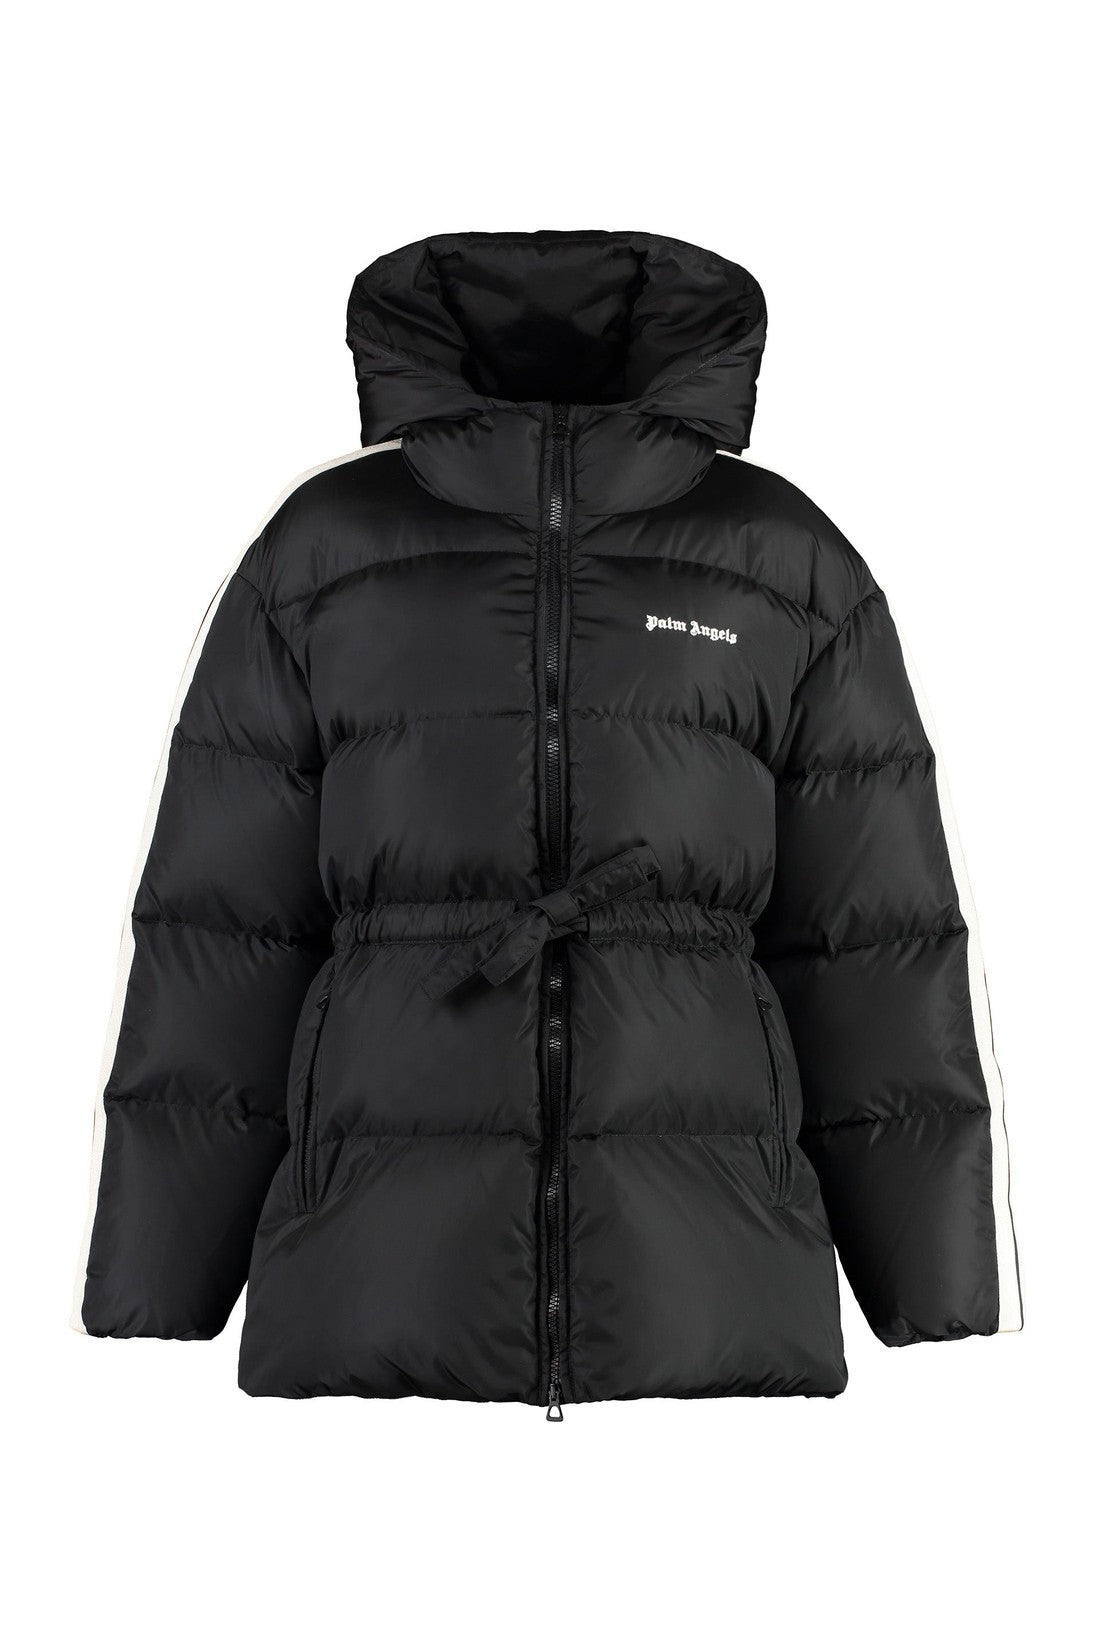 Palm Angels-OUTLET-SALE-Hooded techno fabric down jacket-ARCHIVIST